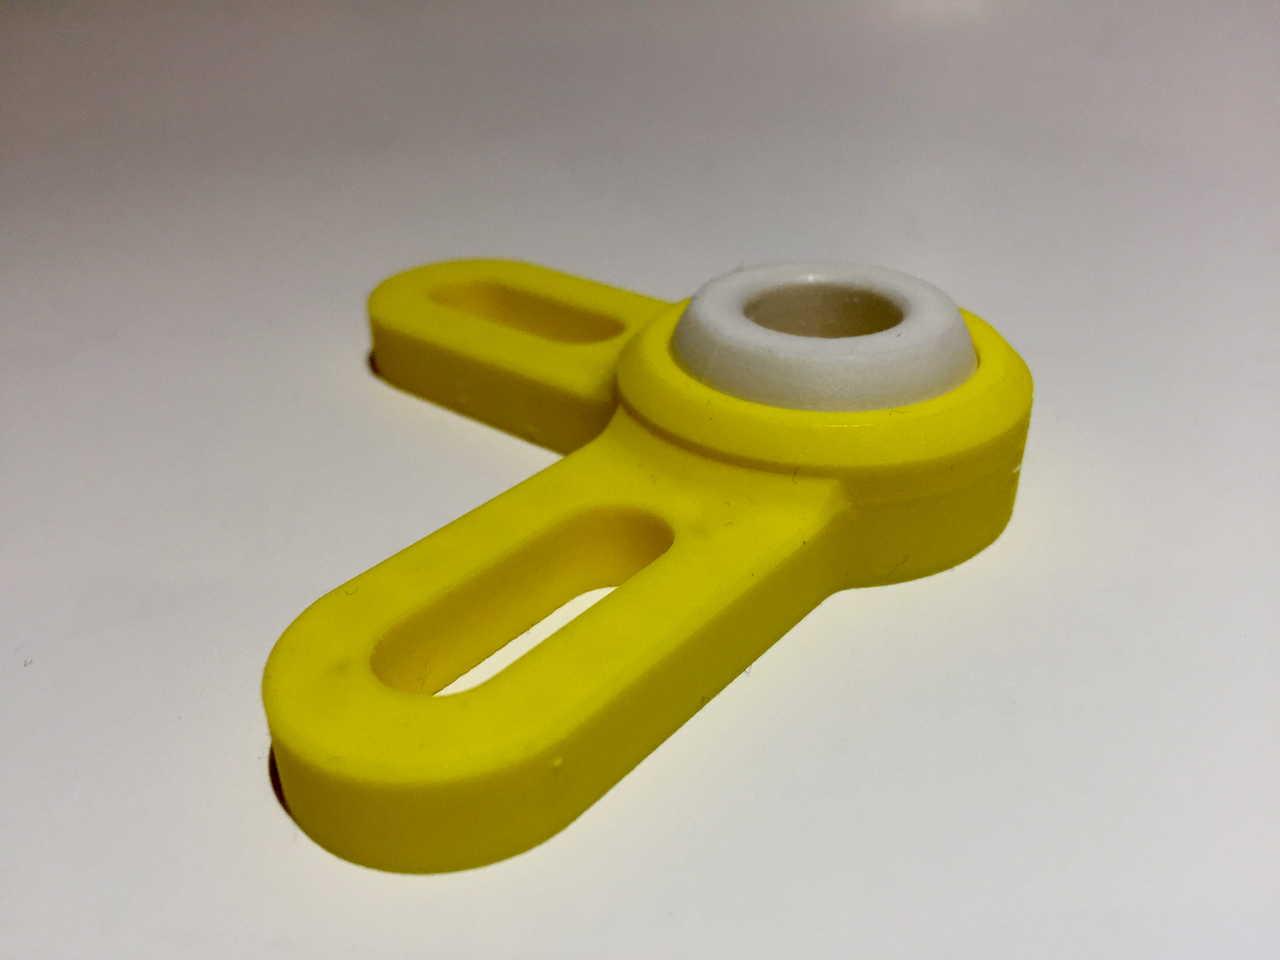  A ball joint 3D printed in one operation by 3ntr 